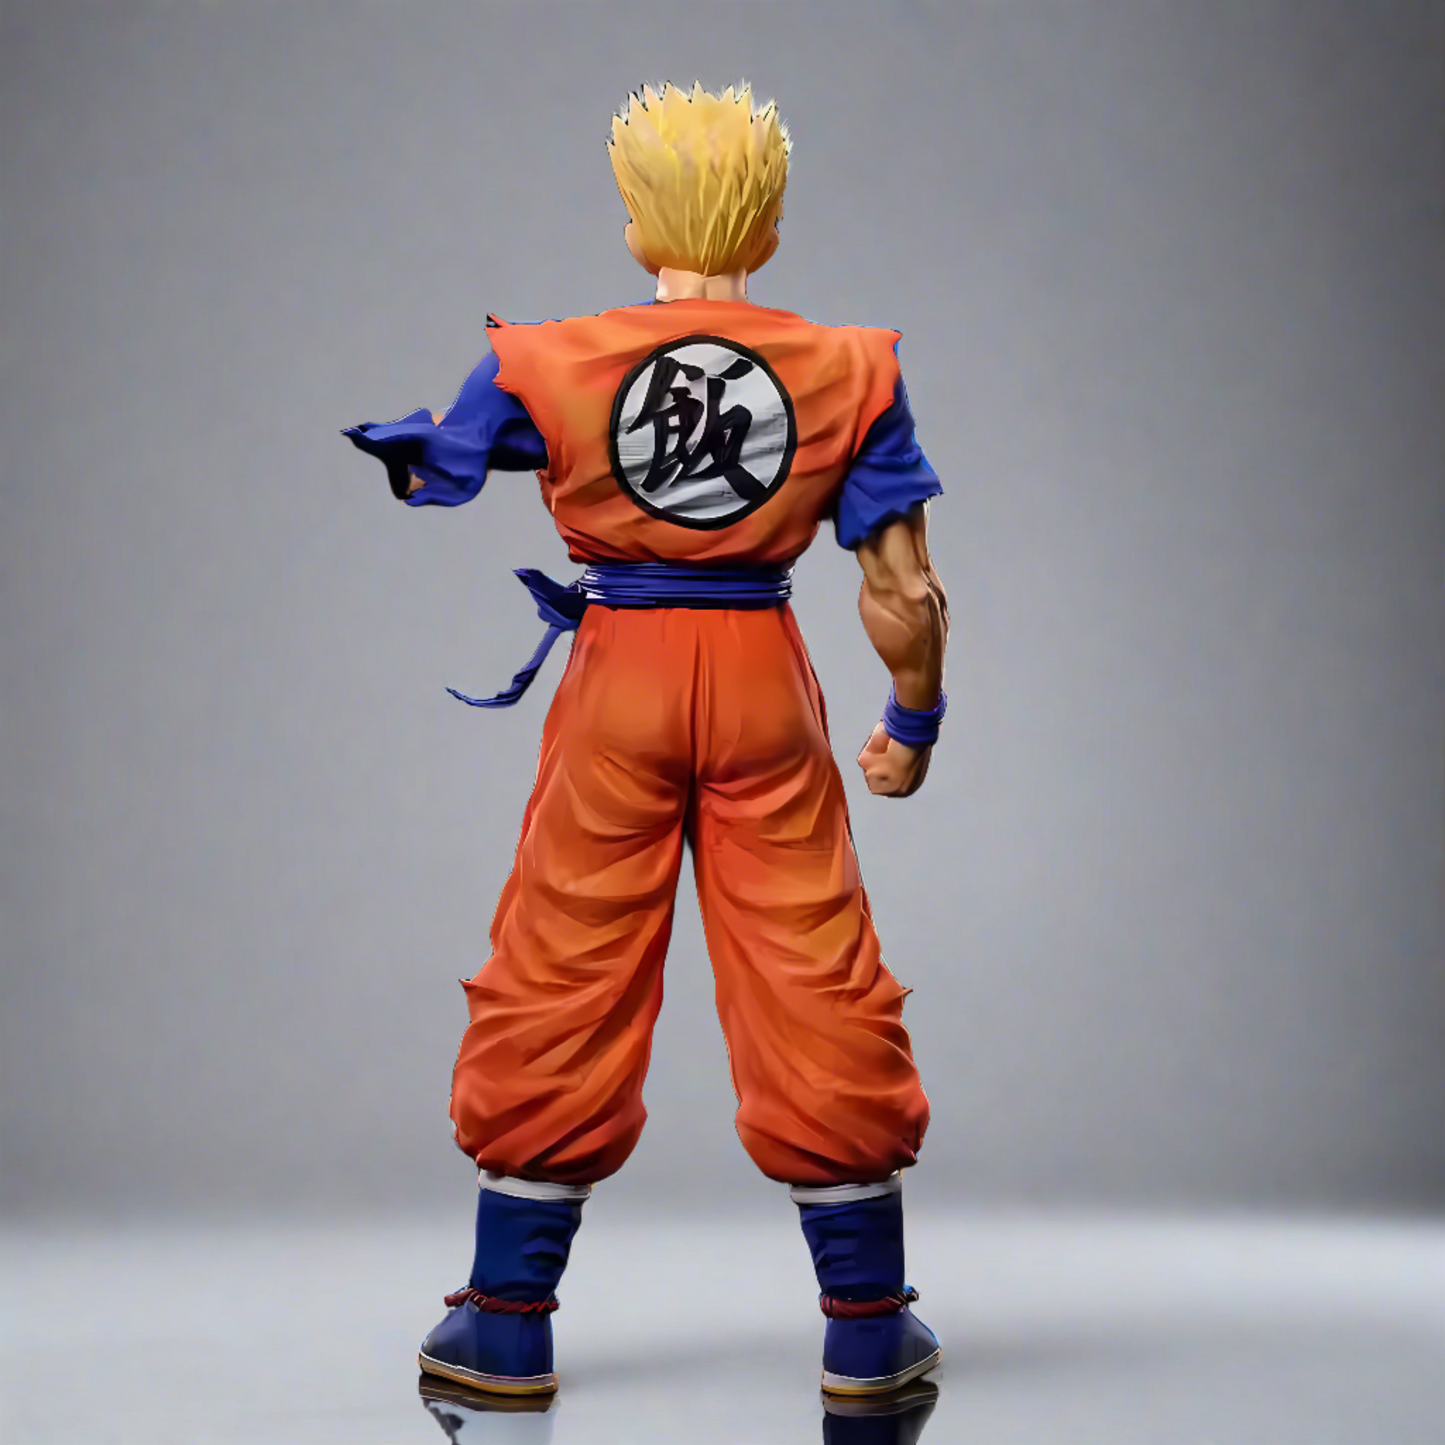 Rear view of the Dragon Ball collectible figures of Super Saiyan Gohan, highlighting the meticulous detail of the character's costume and fiery aura.